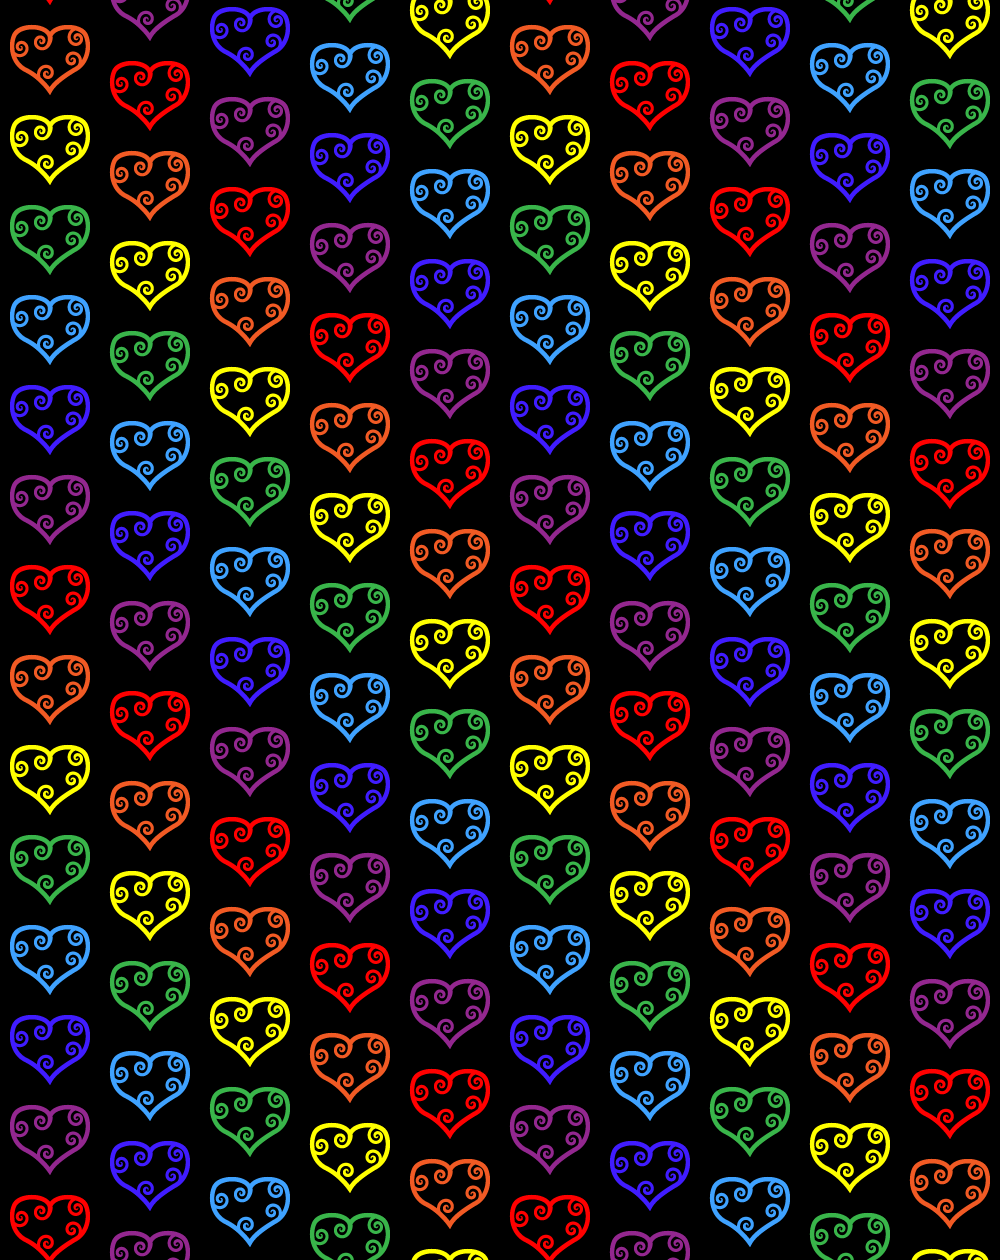 A Repeating Rainbow Pattern Of Hearts On A Black Background - Rainbow Heart - HD Wallpaper 